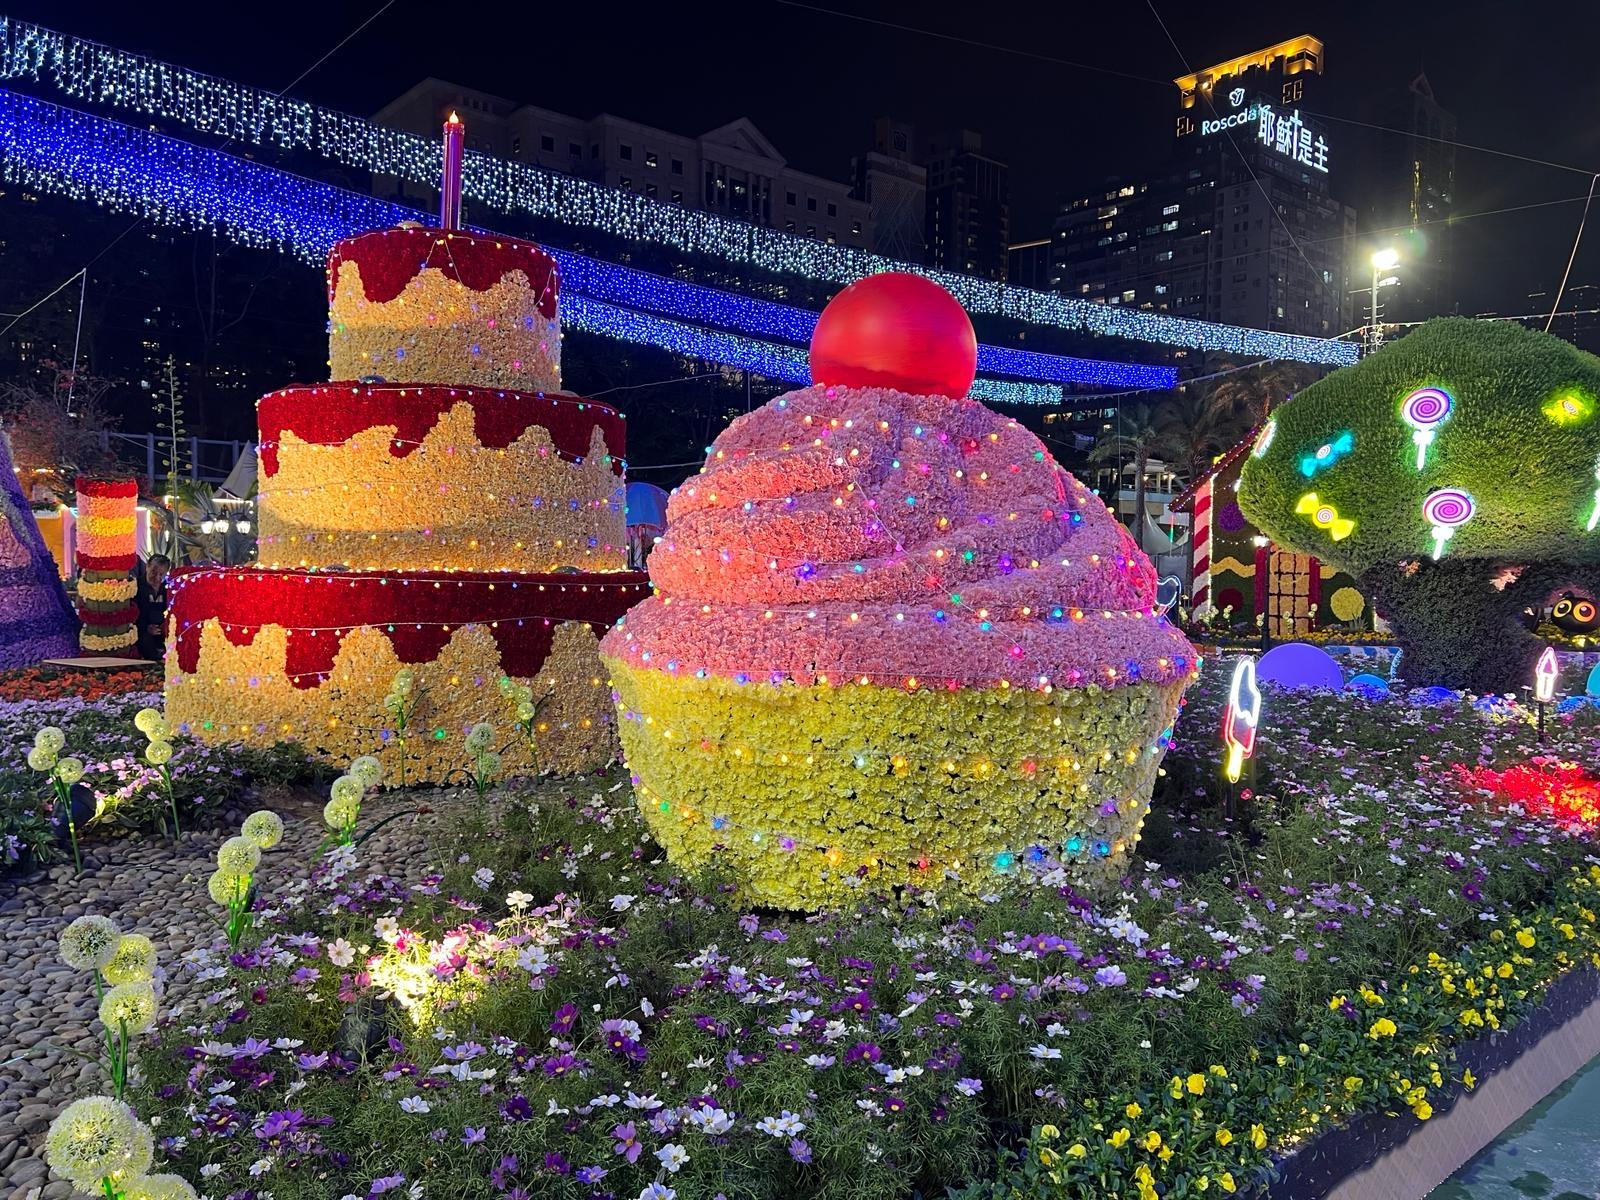 The Hong Kong Flower Show 2024 will be held at Victoria Park from tomorrow (March 15) until March 24. This year's flower show features "Floral Joy Around Town" as the main theme and angelonia as the theme flower. At night, the large-scale landscape displays have enhanced lighting effects to provide visitors with a different visual experience. Photo shows the display inspired by The Candy House.
